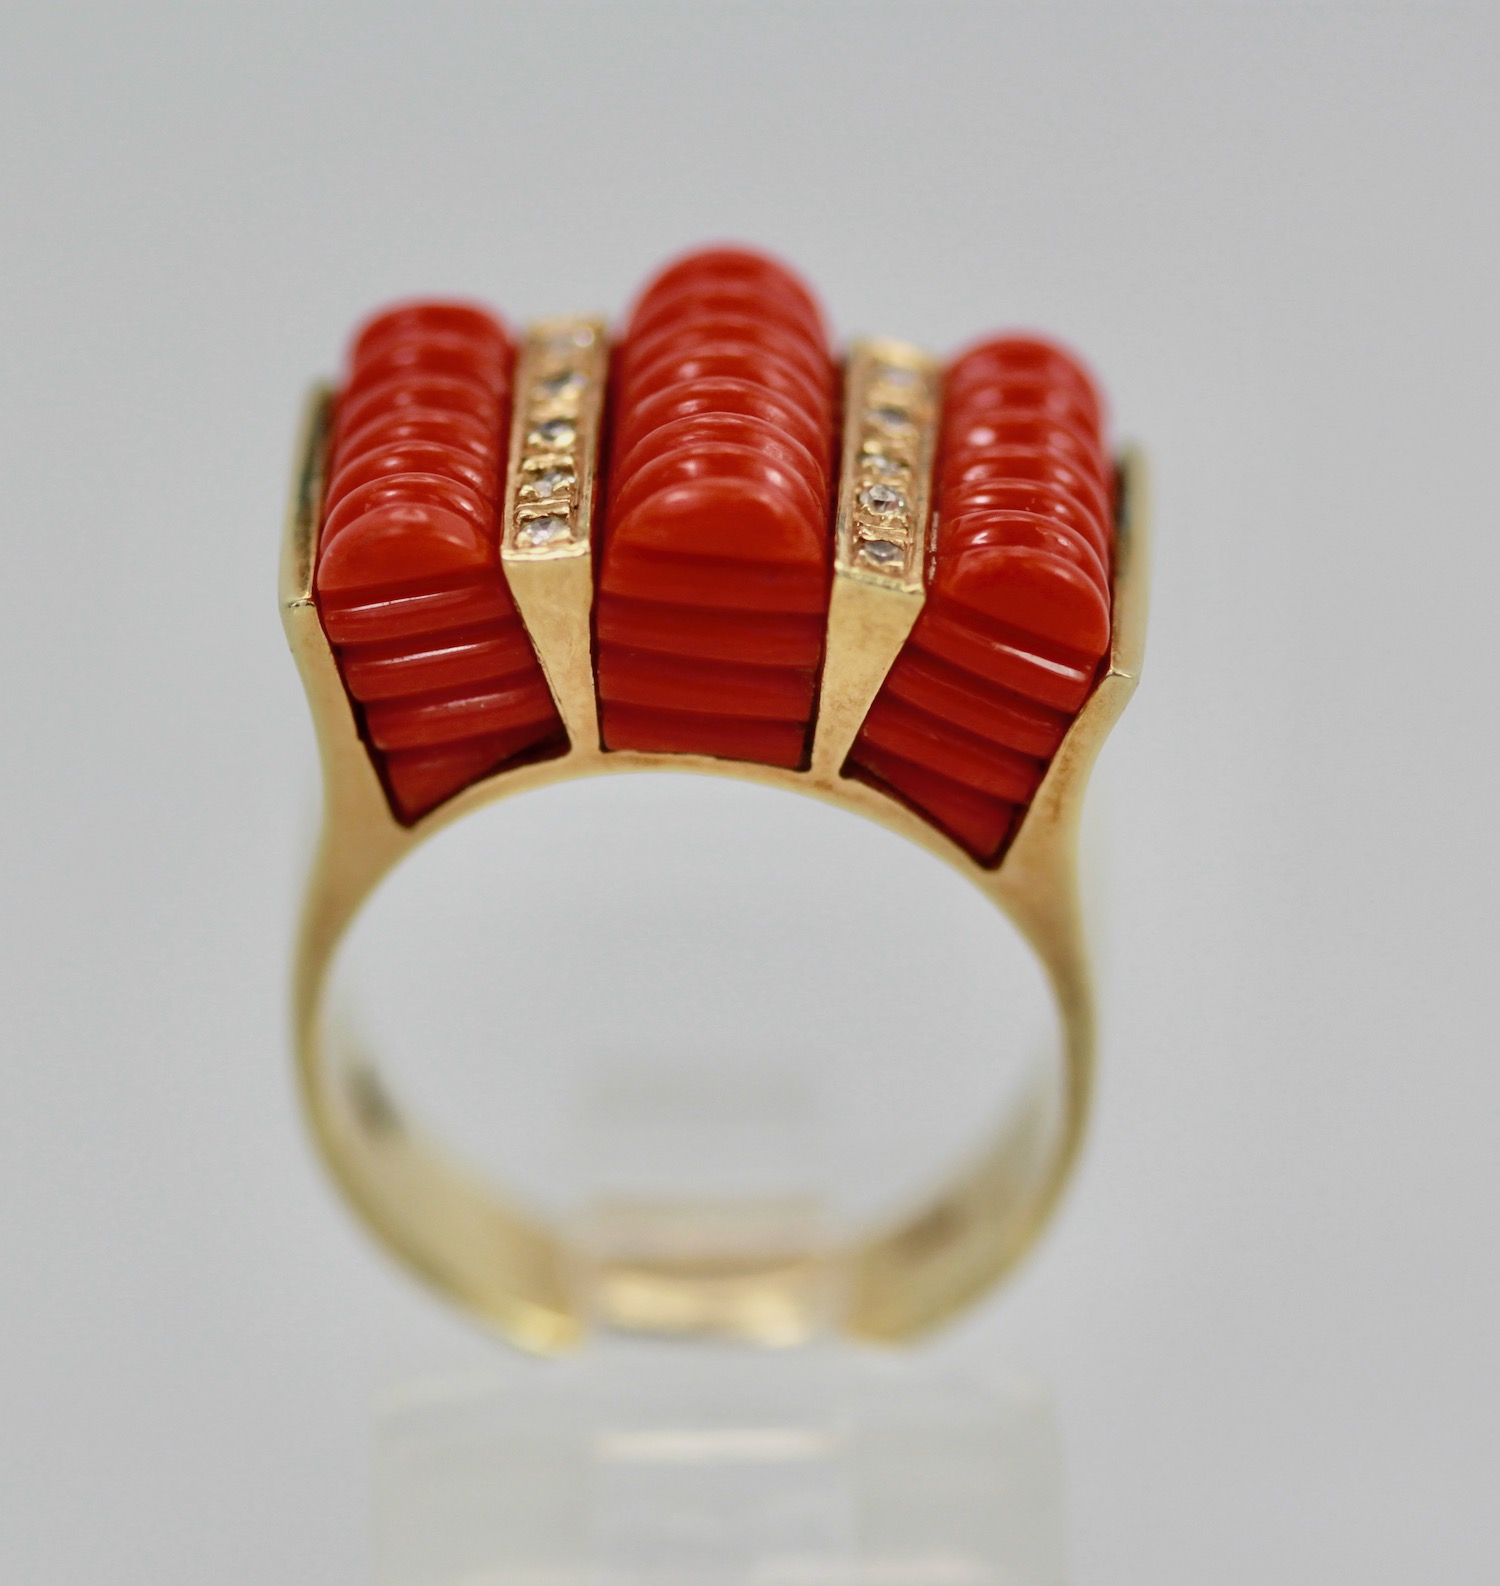 Fluted Coral Diamond Ring 14K Gold – bottom detail